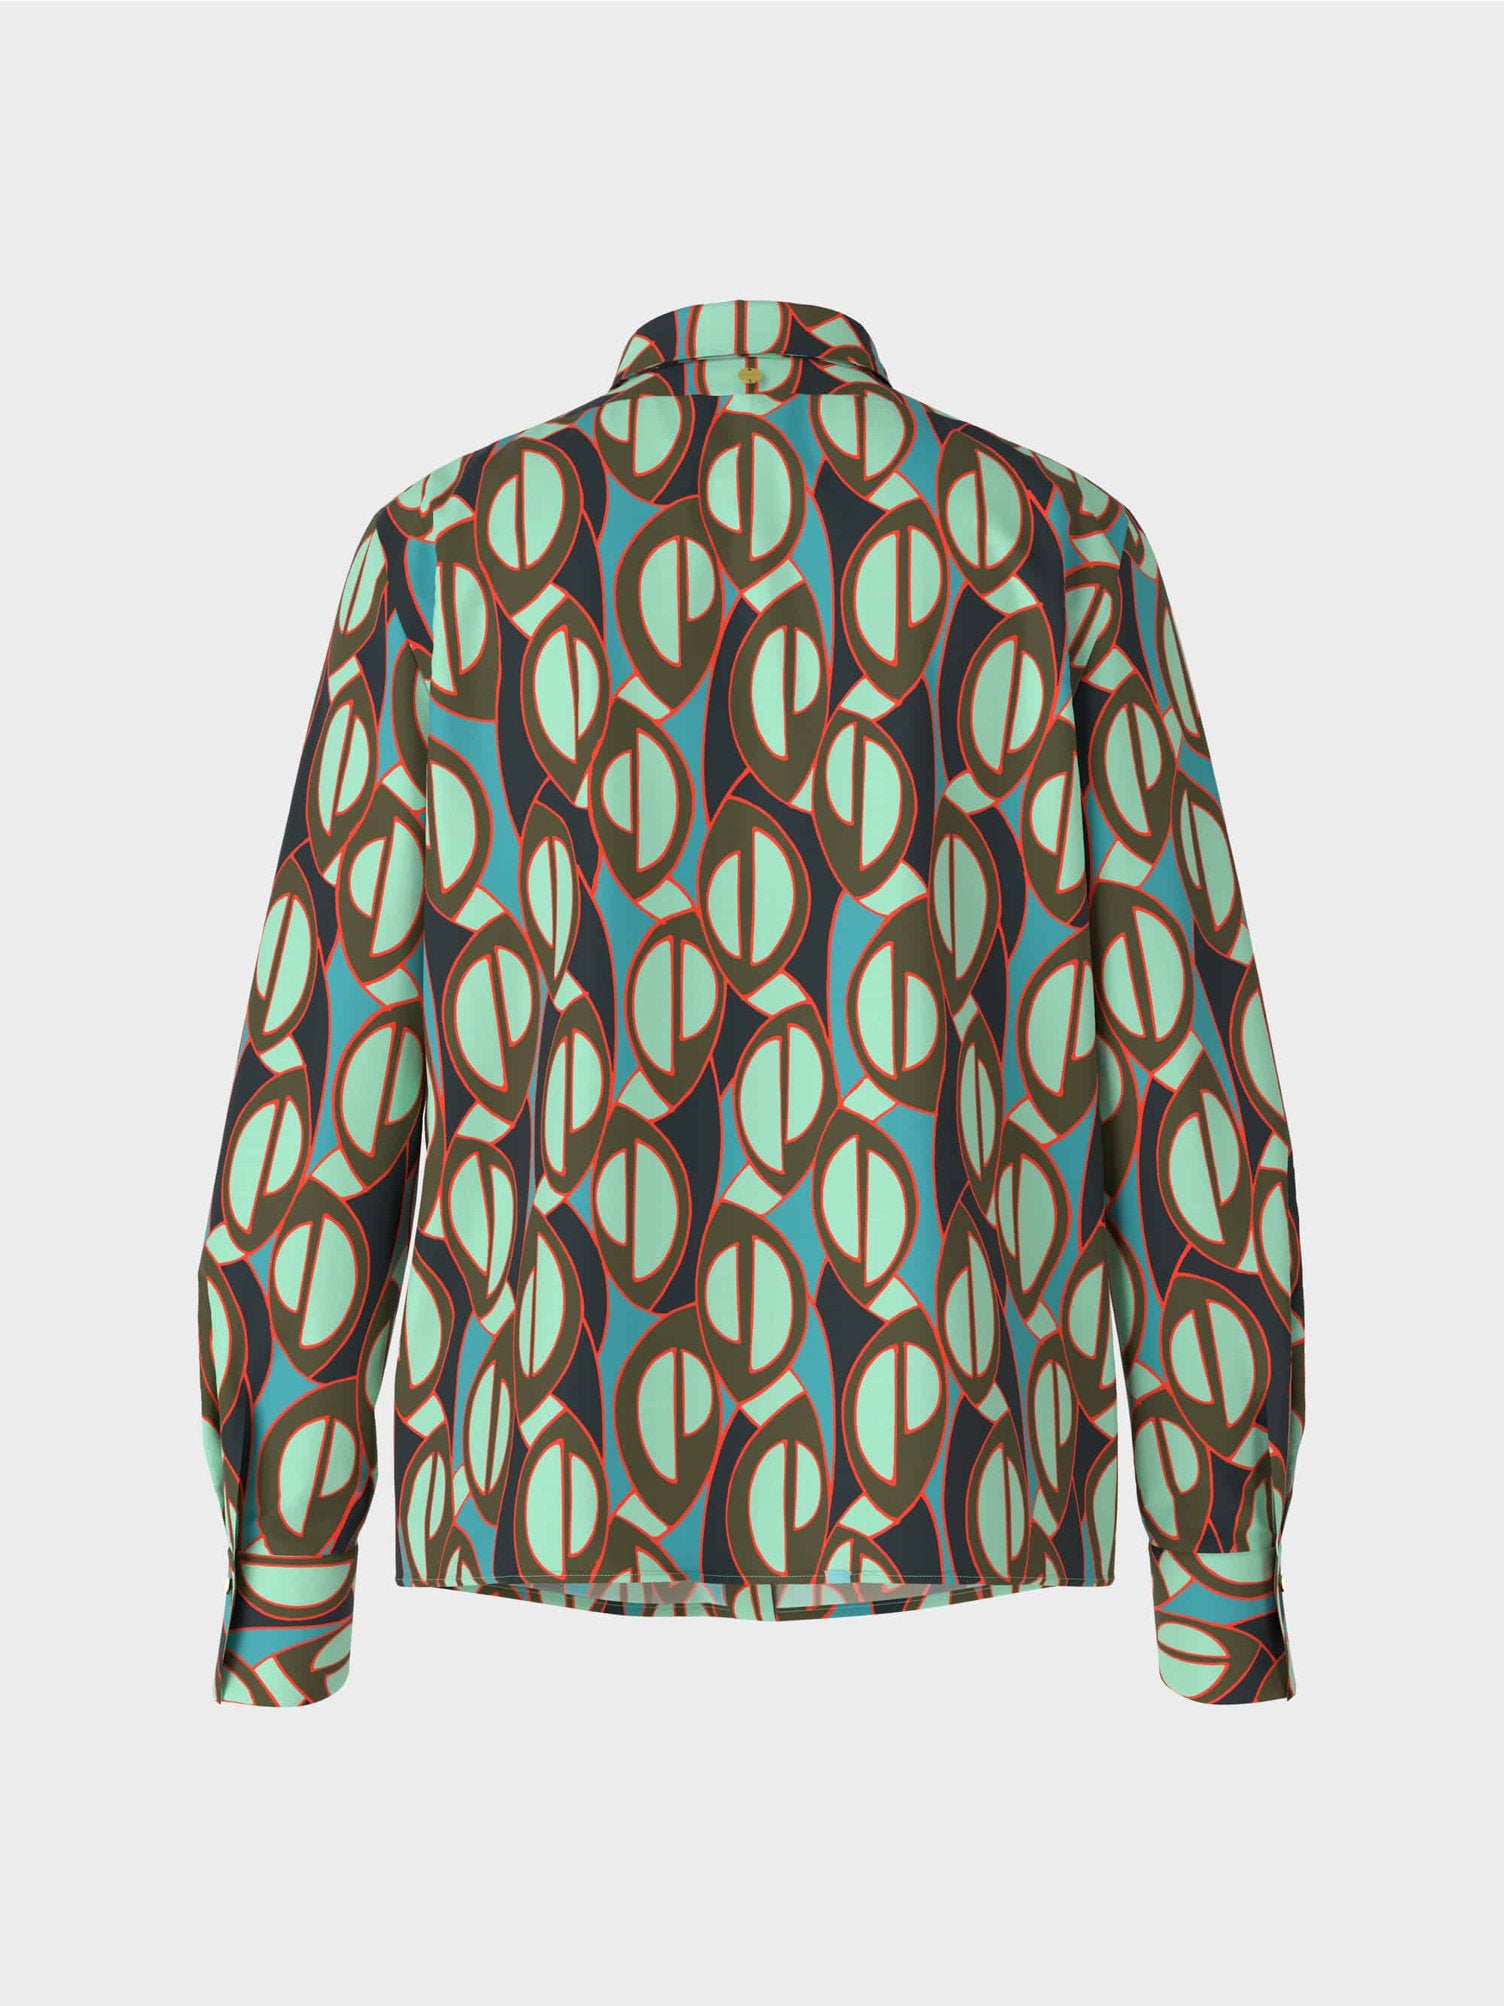 Colourful Patterned Shirt Blouse_WC 51.04 W04_562_07